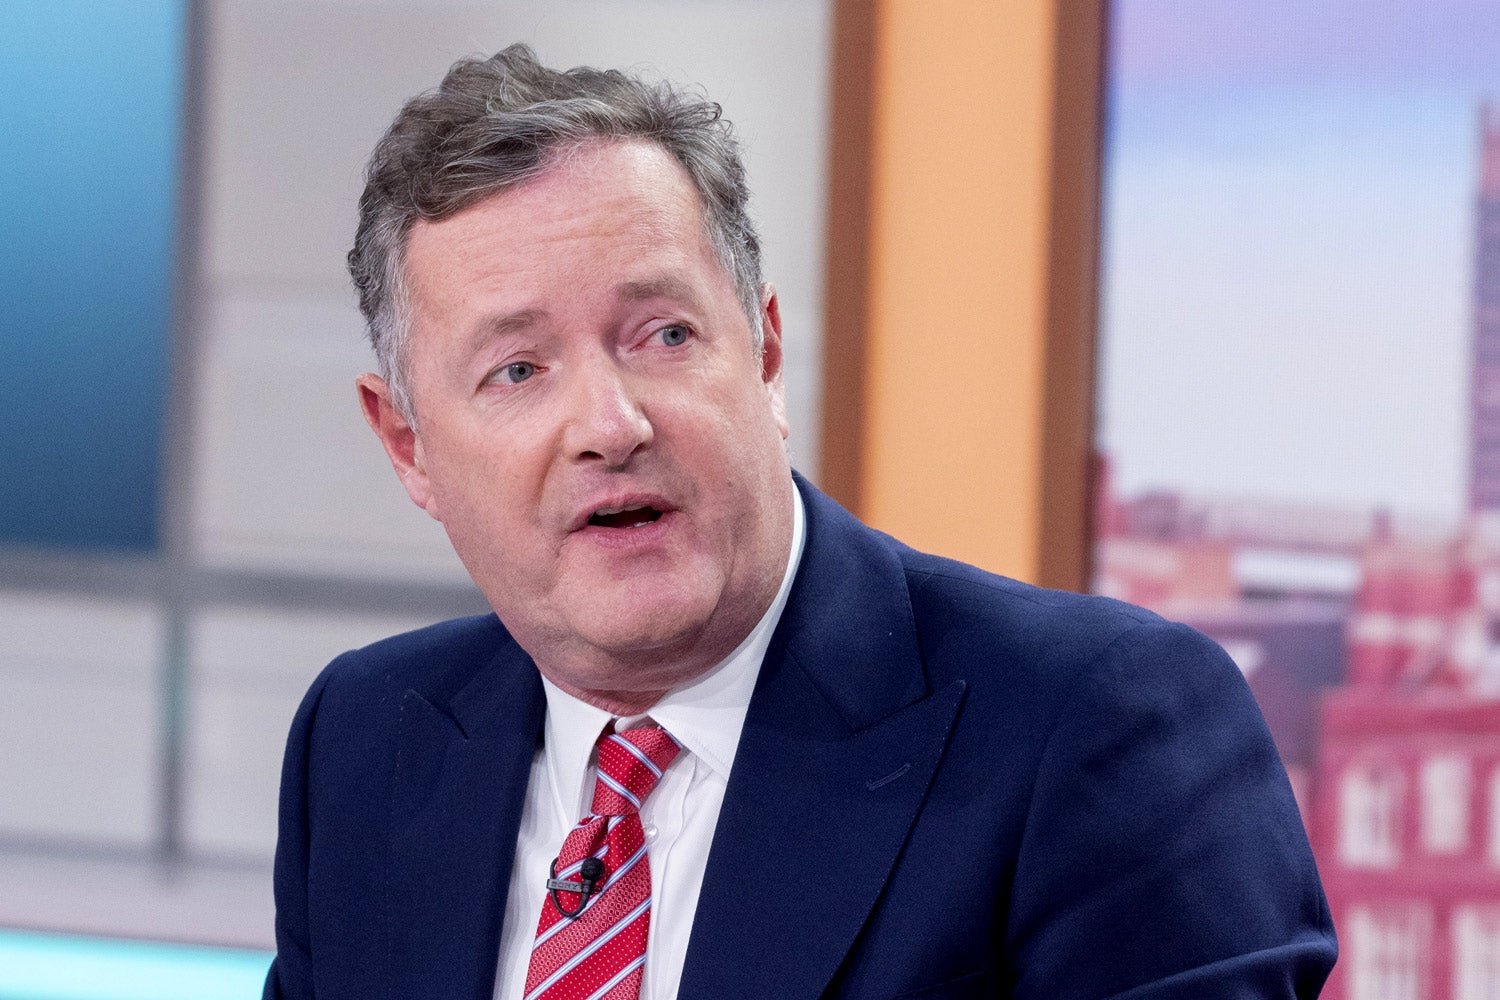 PIERS MORGAN Says Susanna reid Is His Fn after ditches to fly first class to Oscars